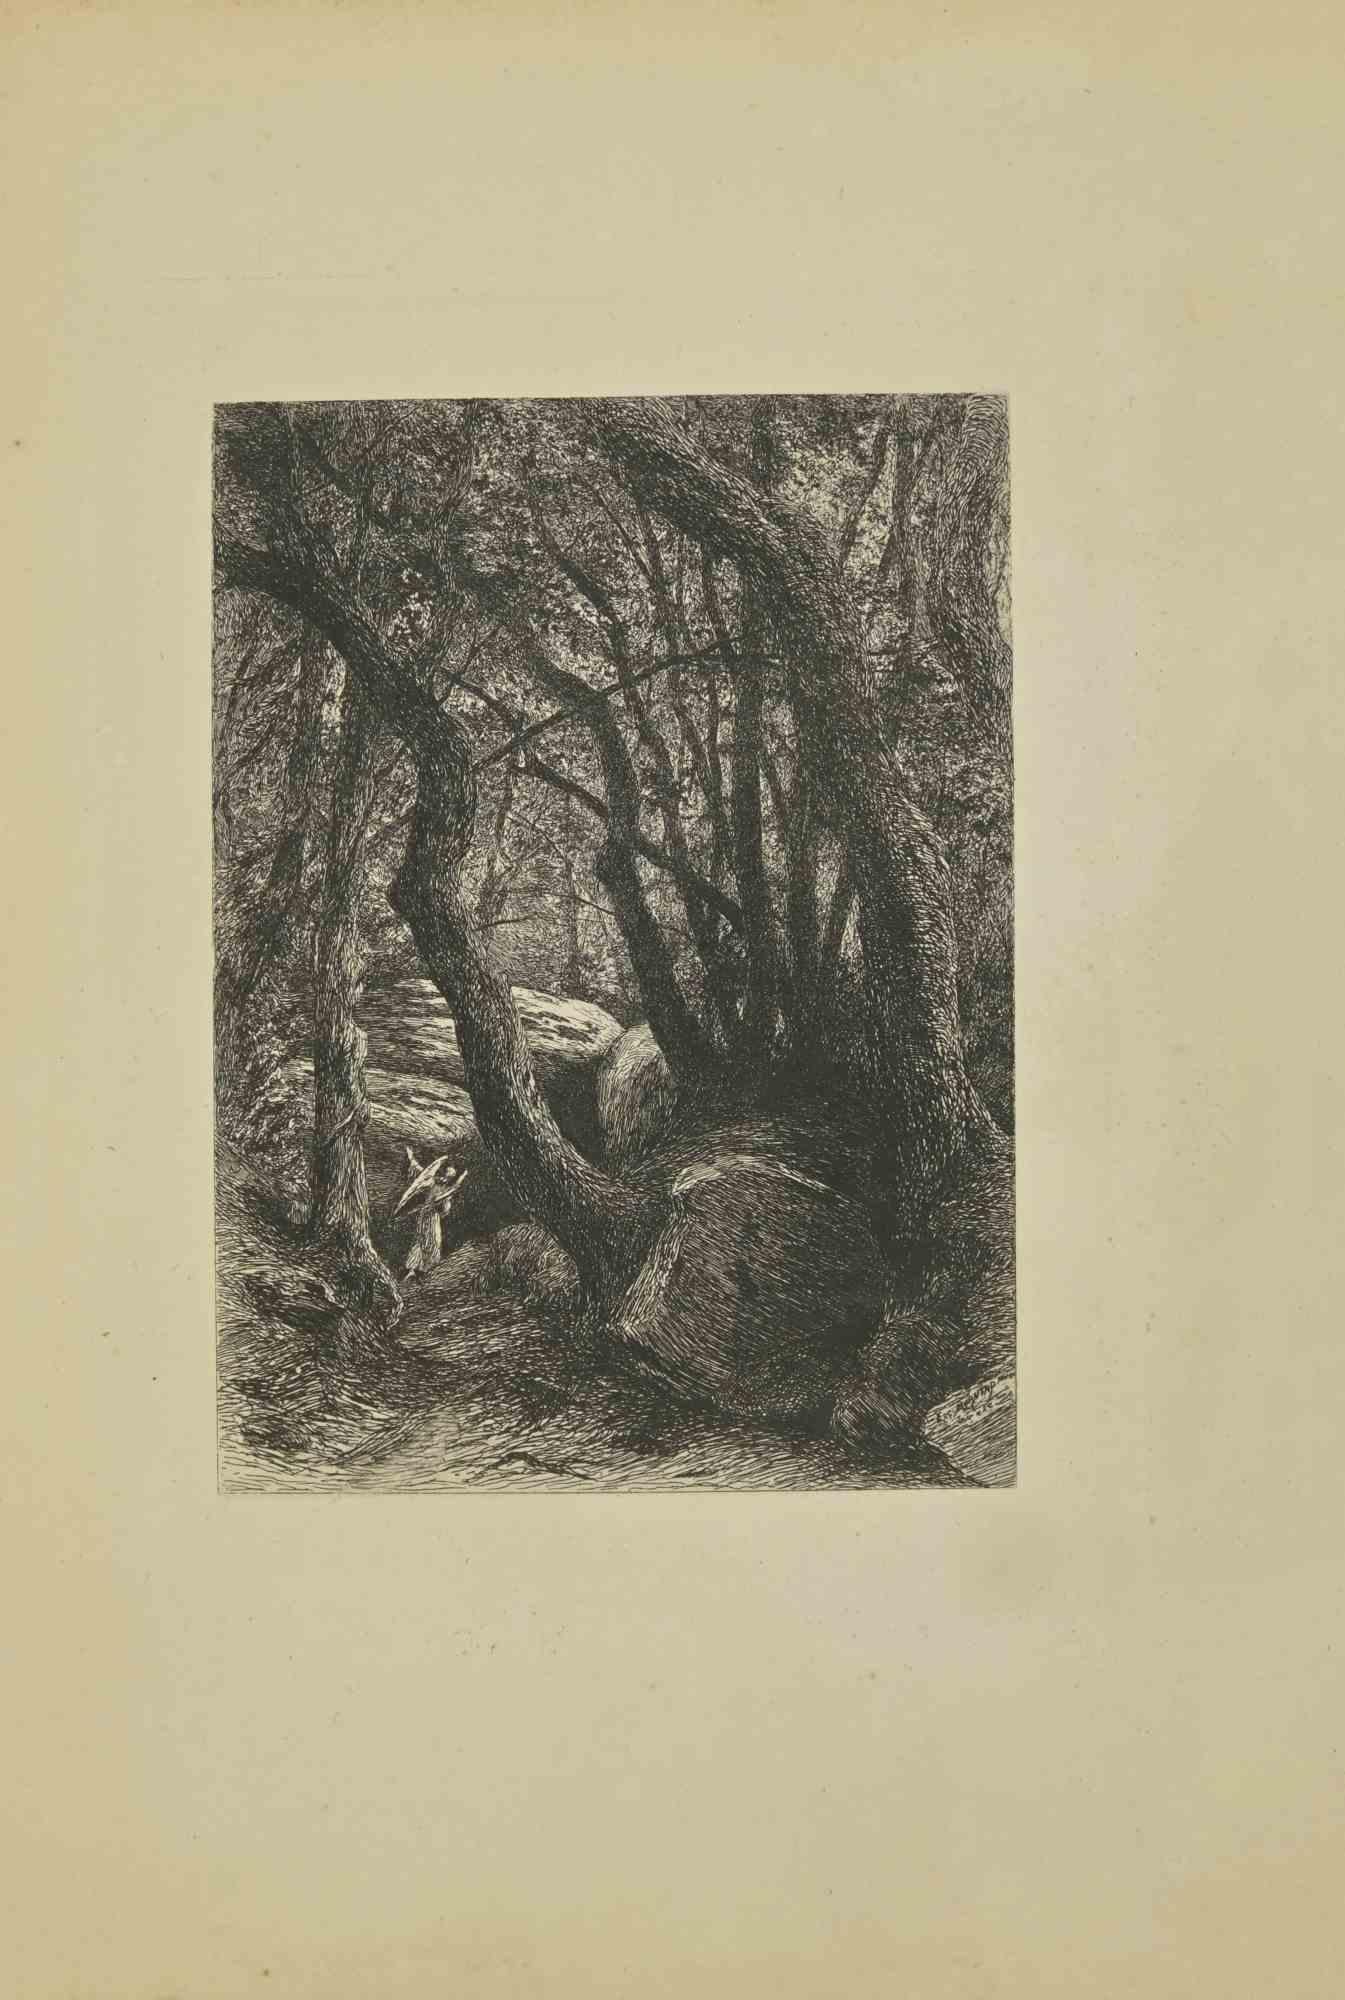 In The Forest - Etching by Eugène Burnand - Late 19th century